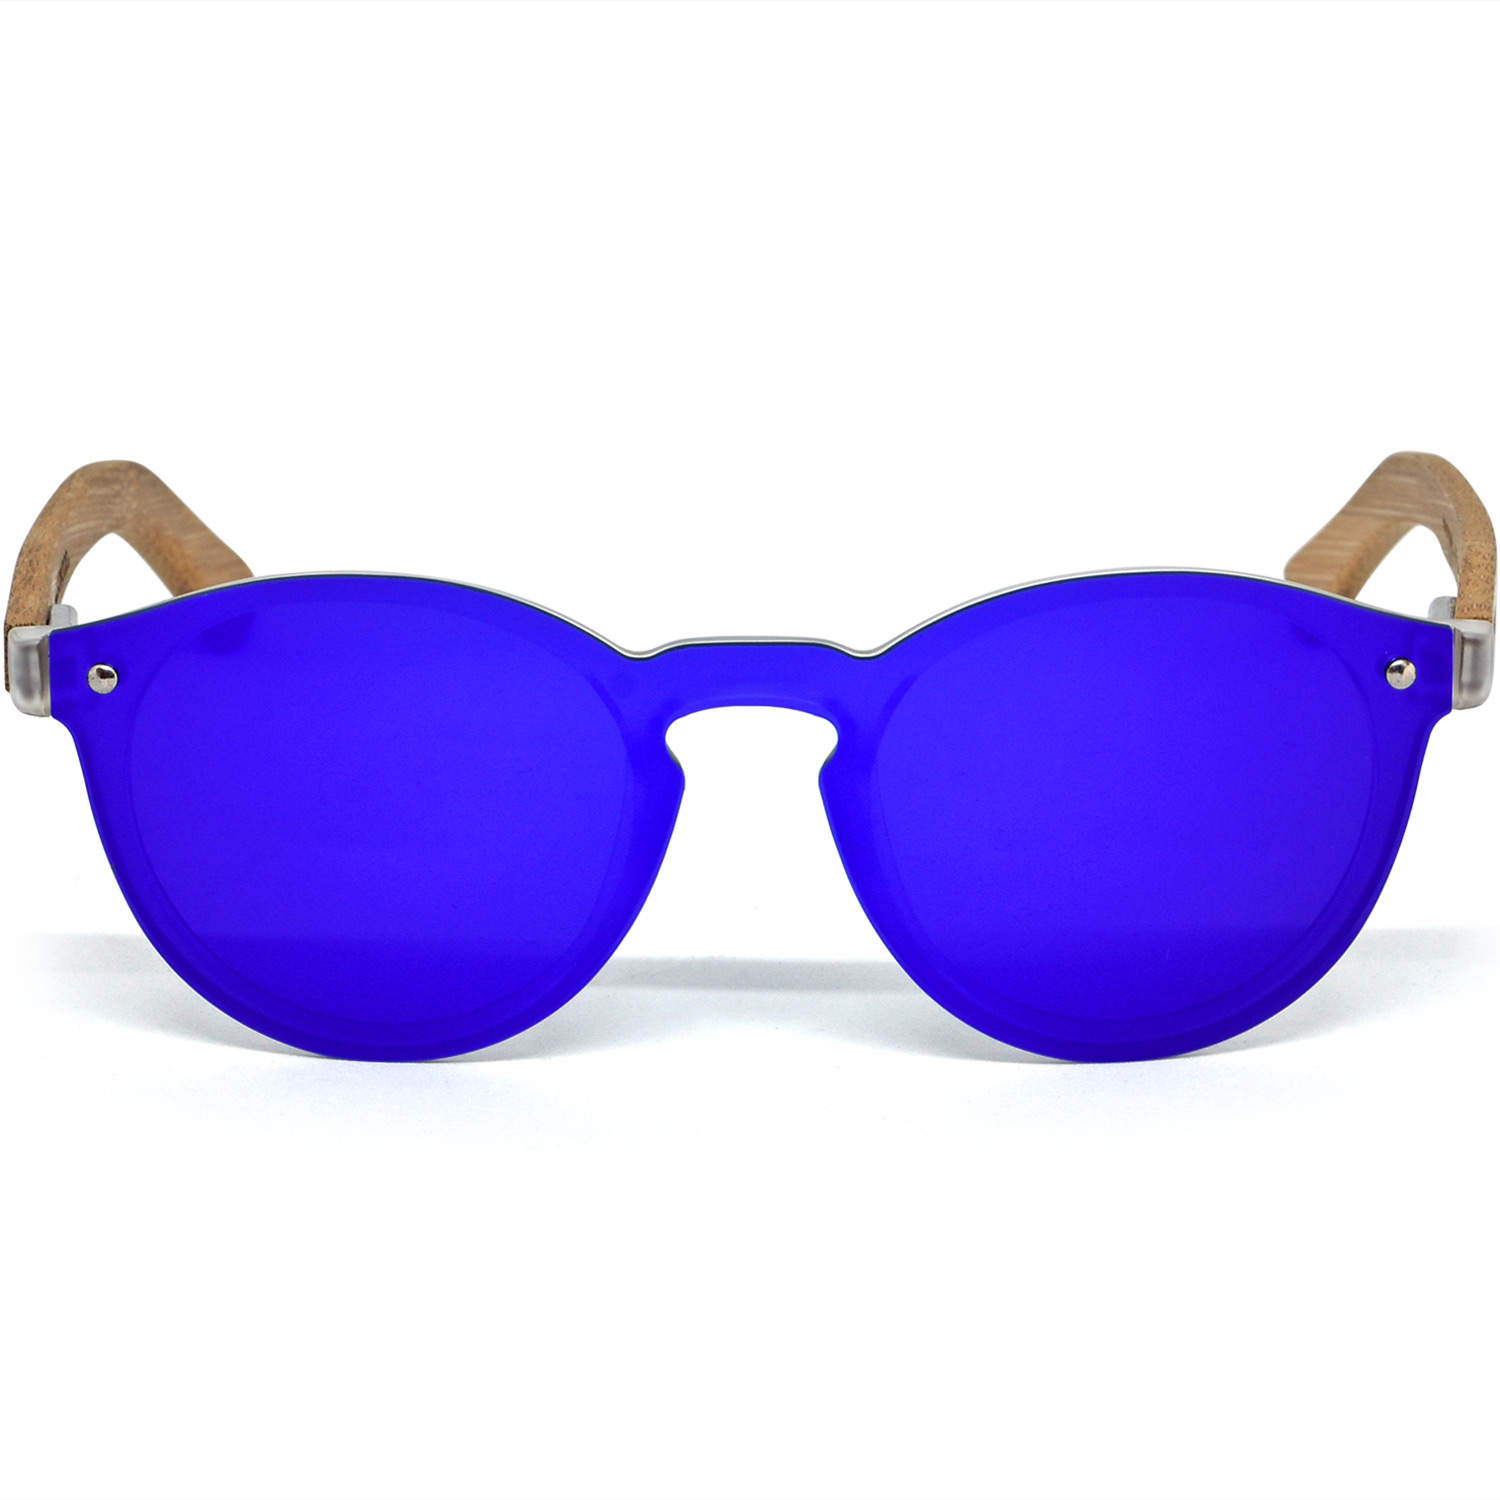 Round Bamboo Wood Sunglasses w/One Piece Blue Reflective Lens